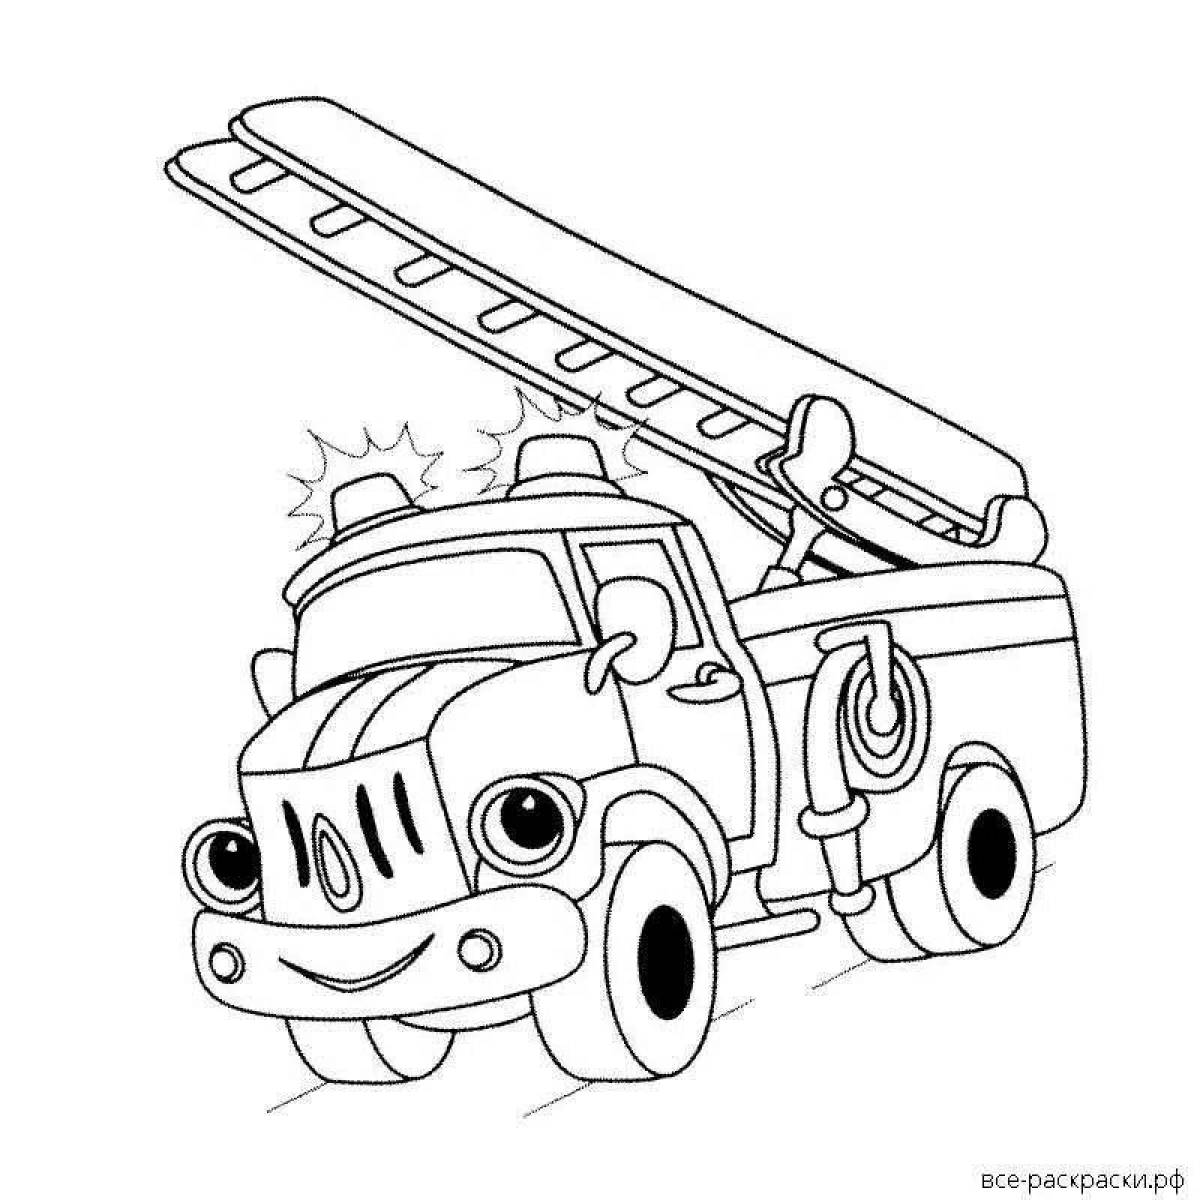 Coloring book bright left tow truck